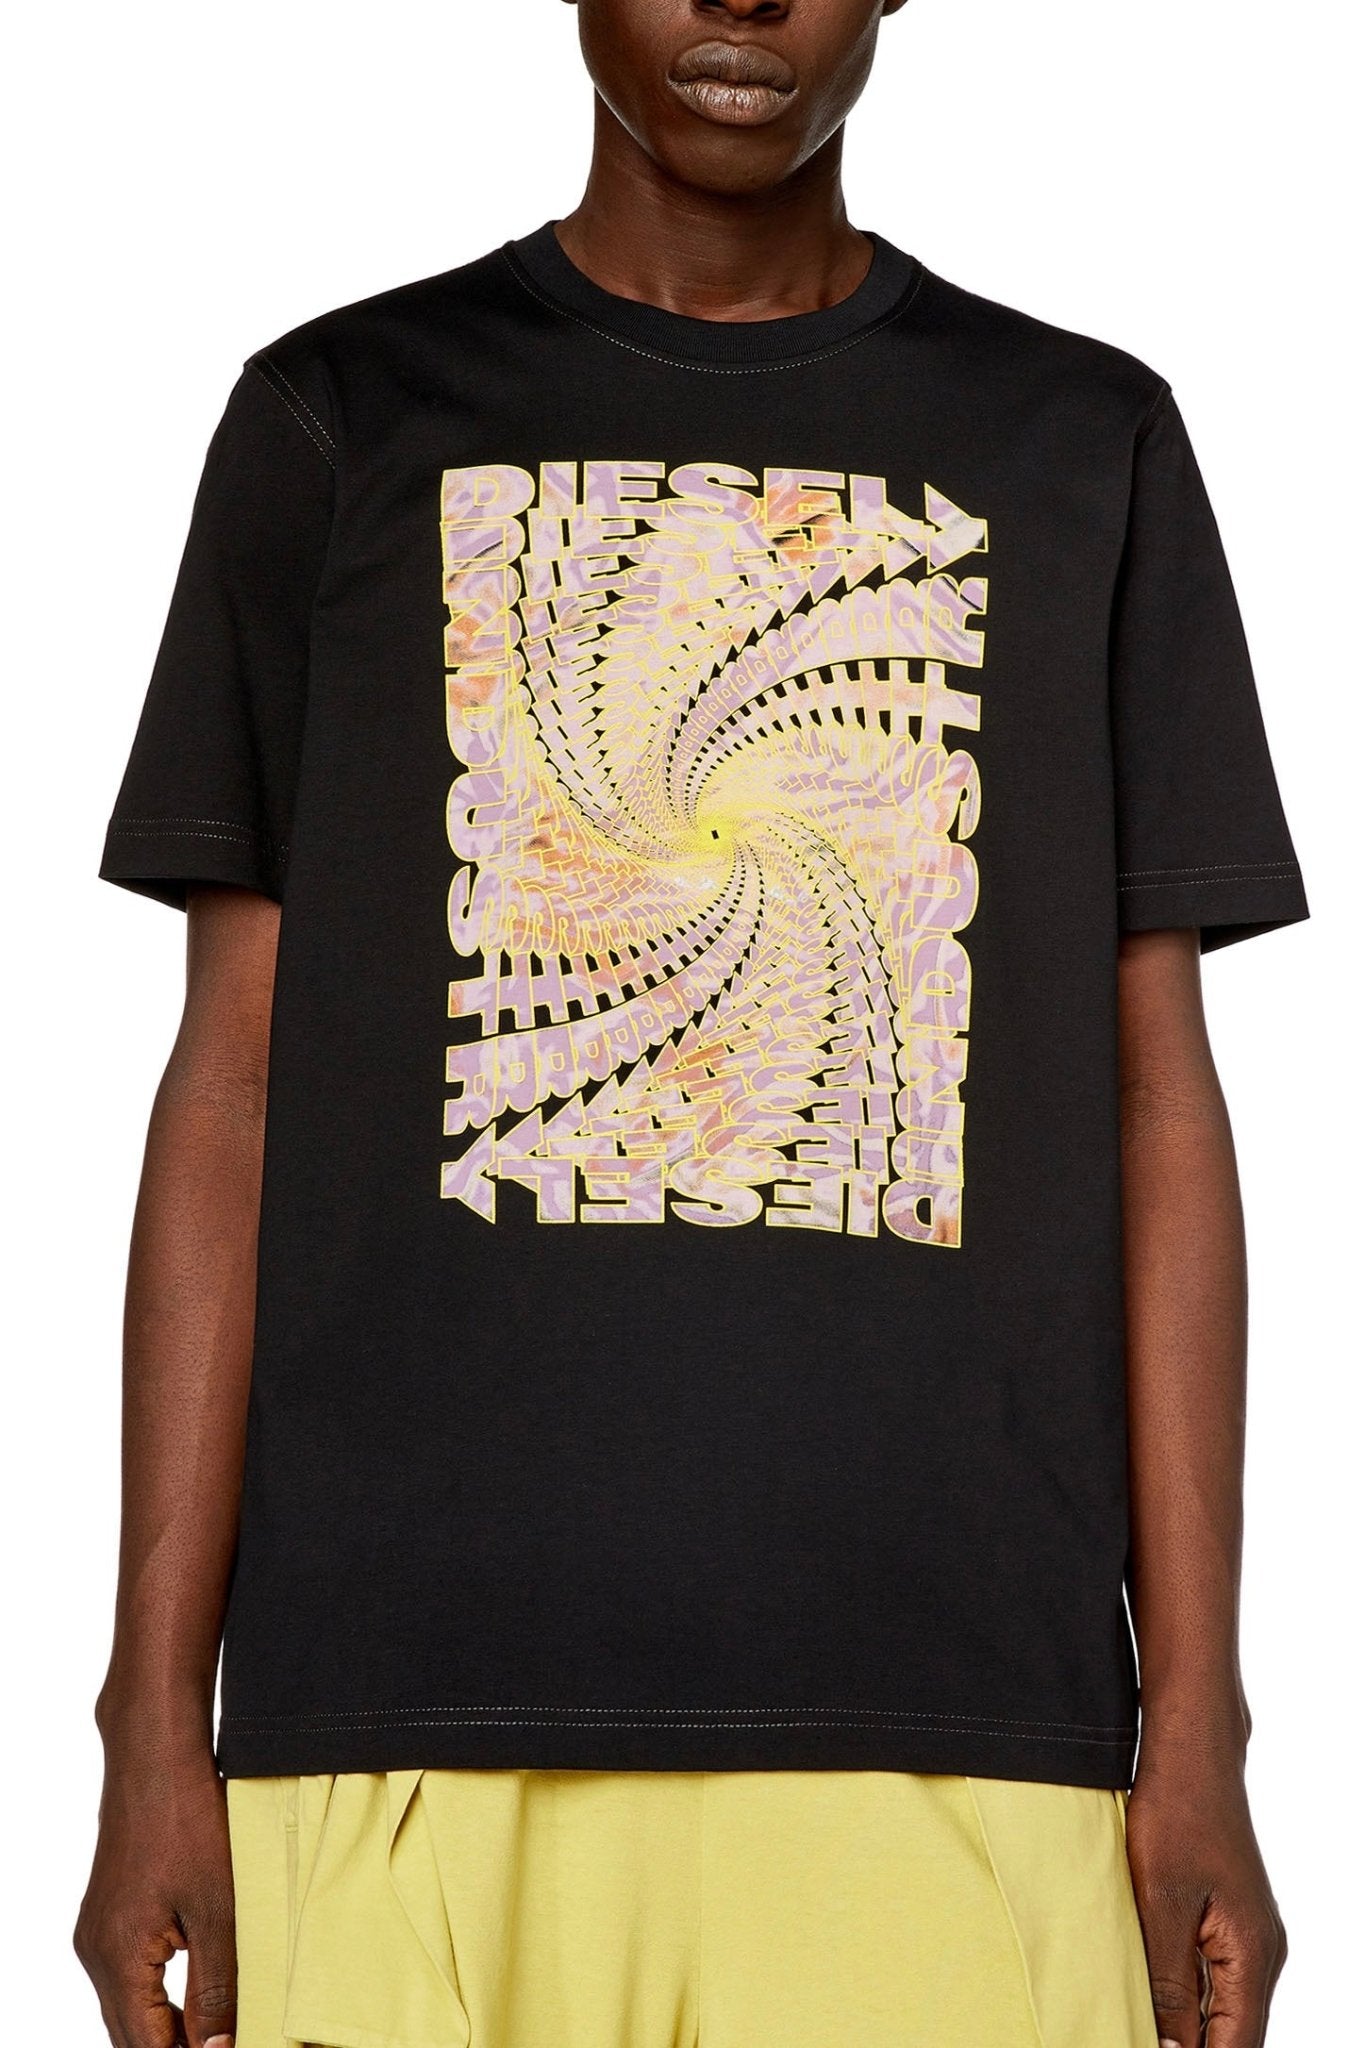 A person wearing a DIESEL T-JUST-N12 T-SHIRT BLACK made from organic cotton jersey, with a graphic spiral design and the word "Diesel" in large, distorted letters from Diesel Industry, paired with yellow shorts.